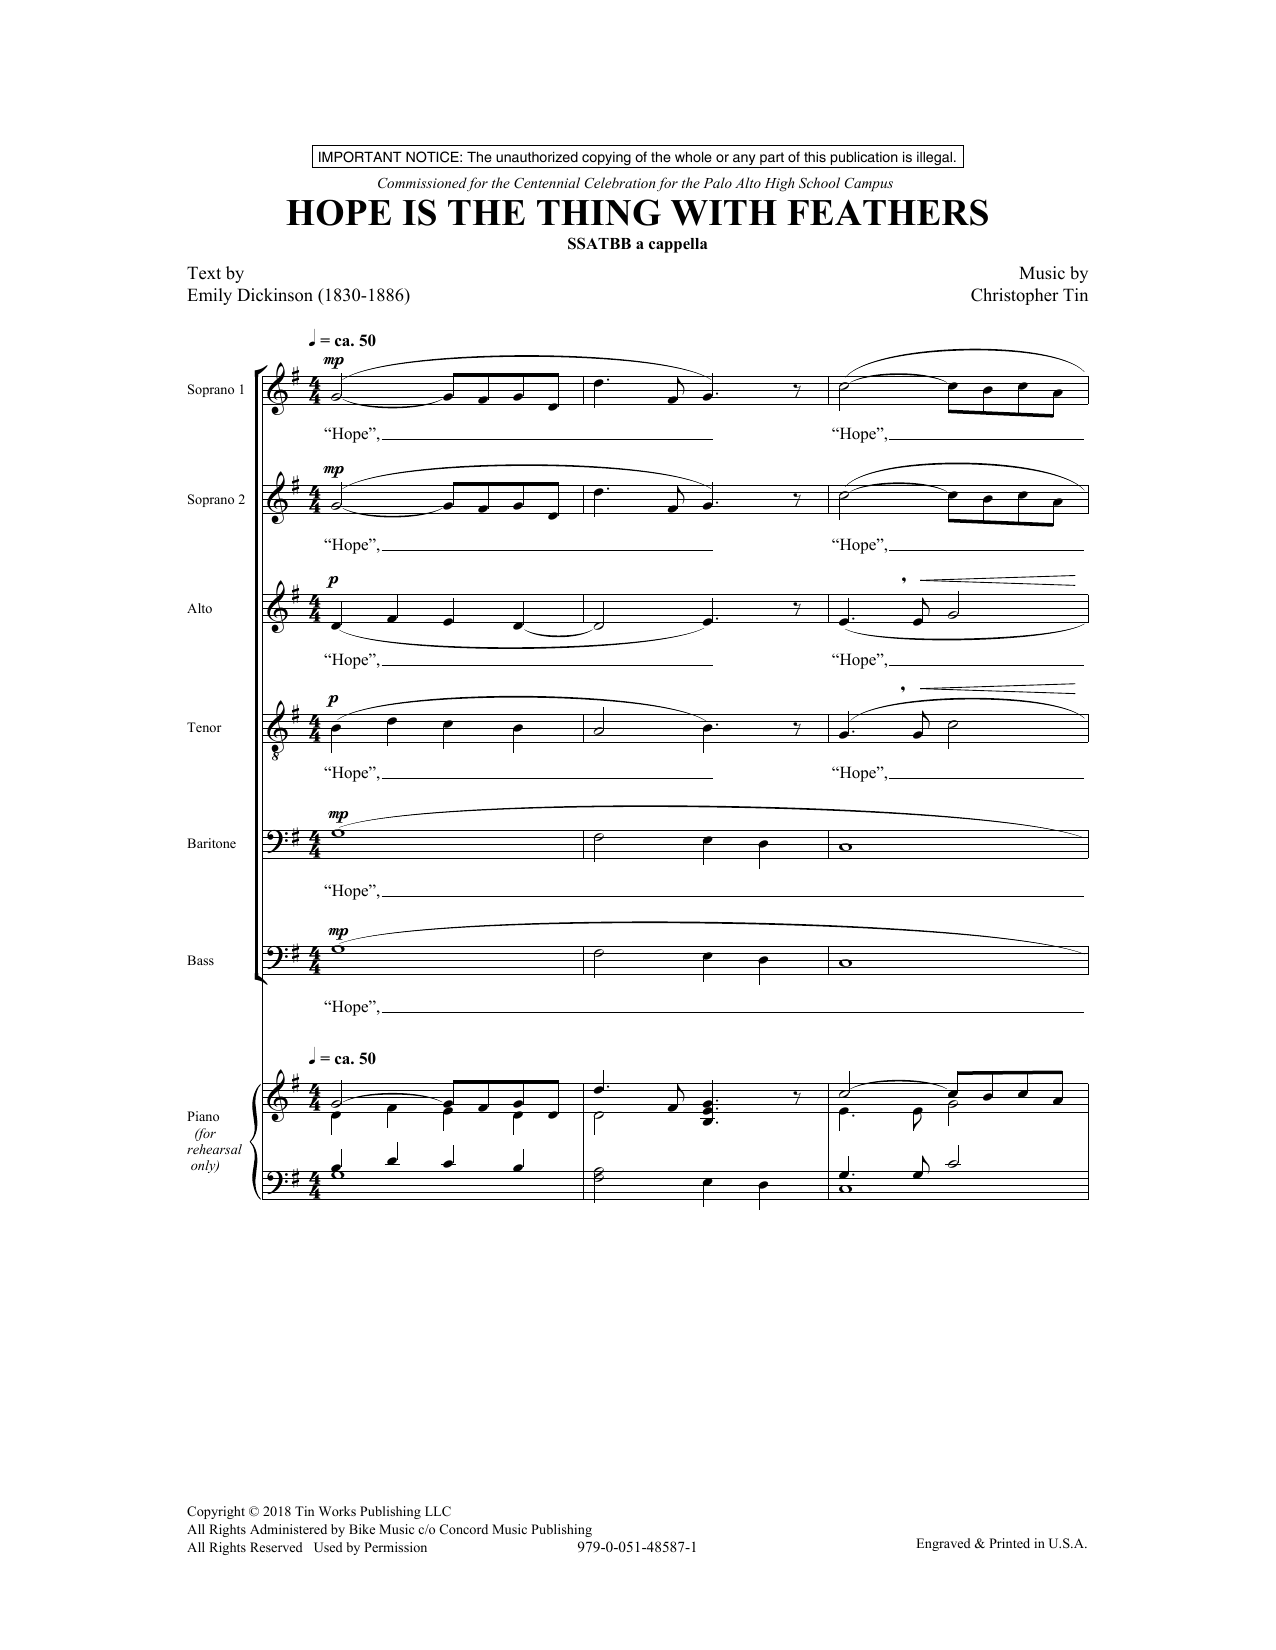 Download Emily Dickinson and Christopher Tin Hope Is The Thing With Feathers Sheet Music